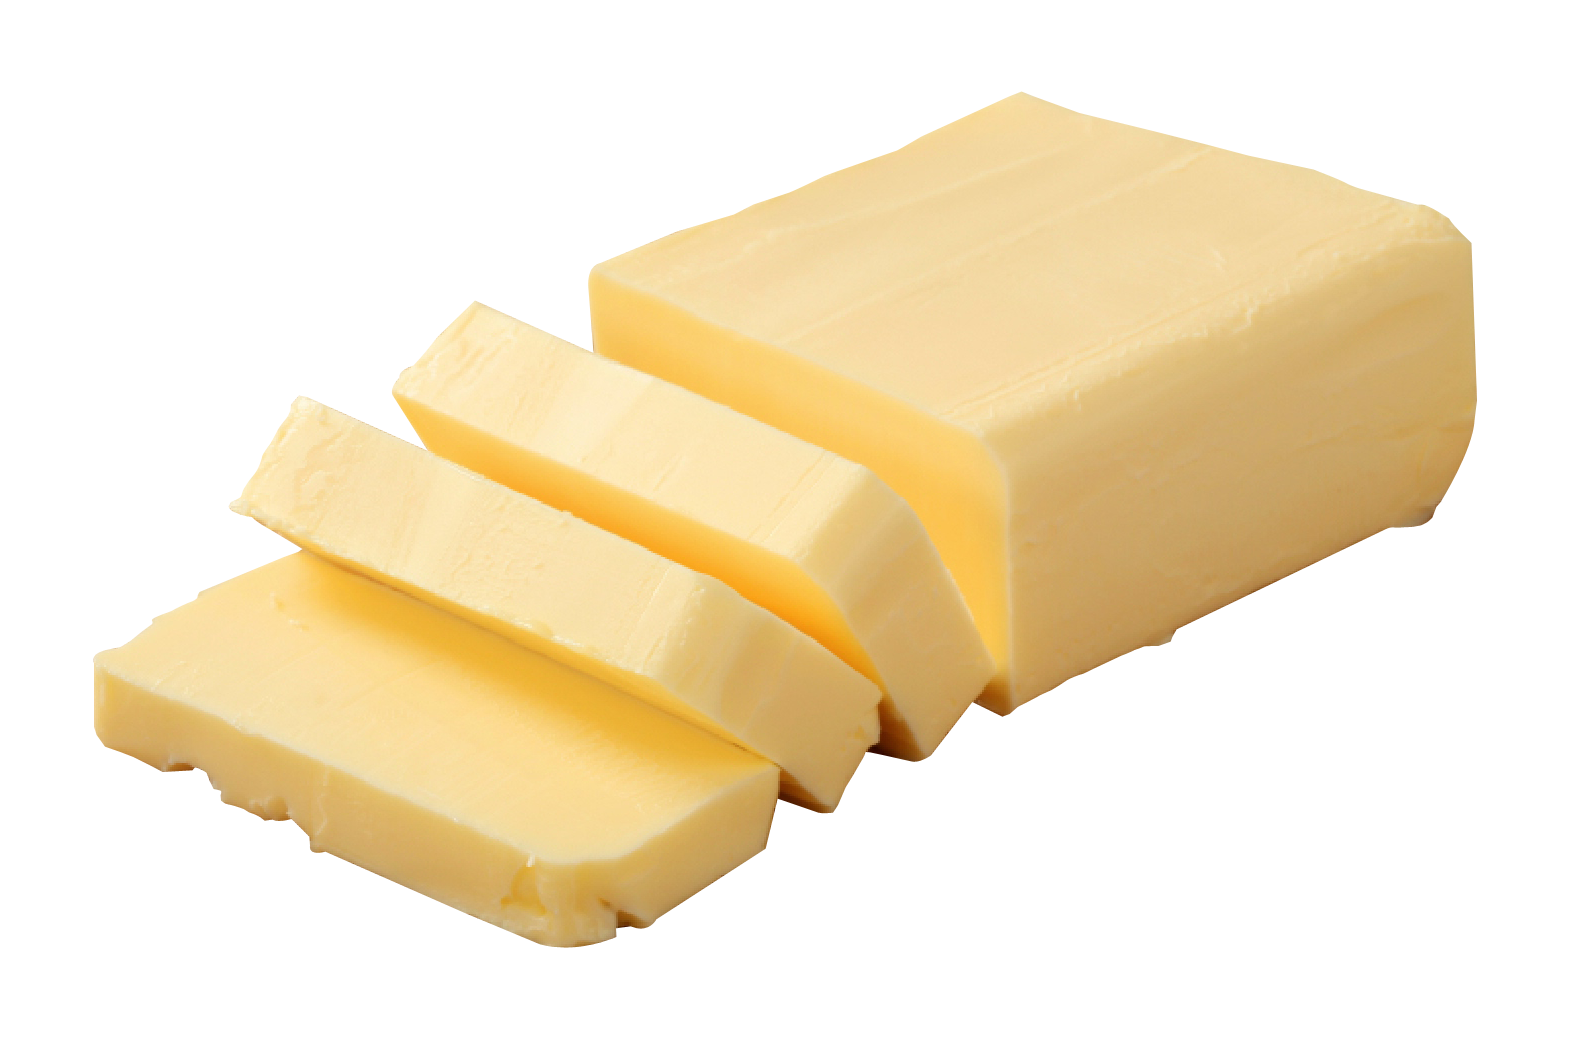 The role of butter in our col